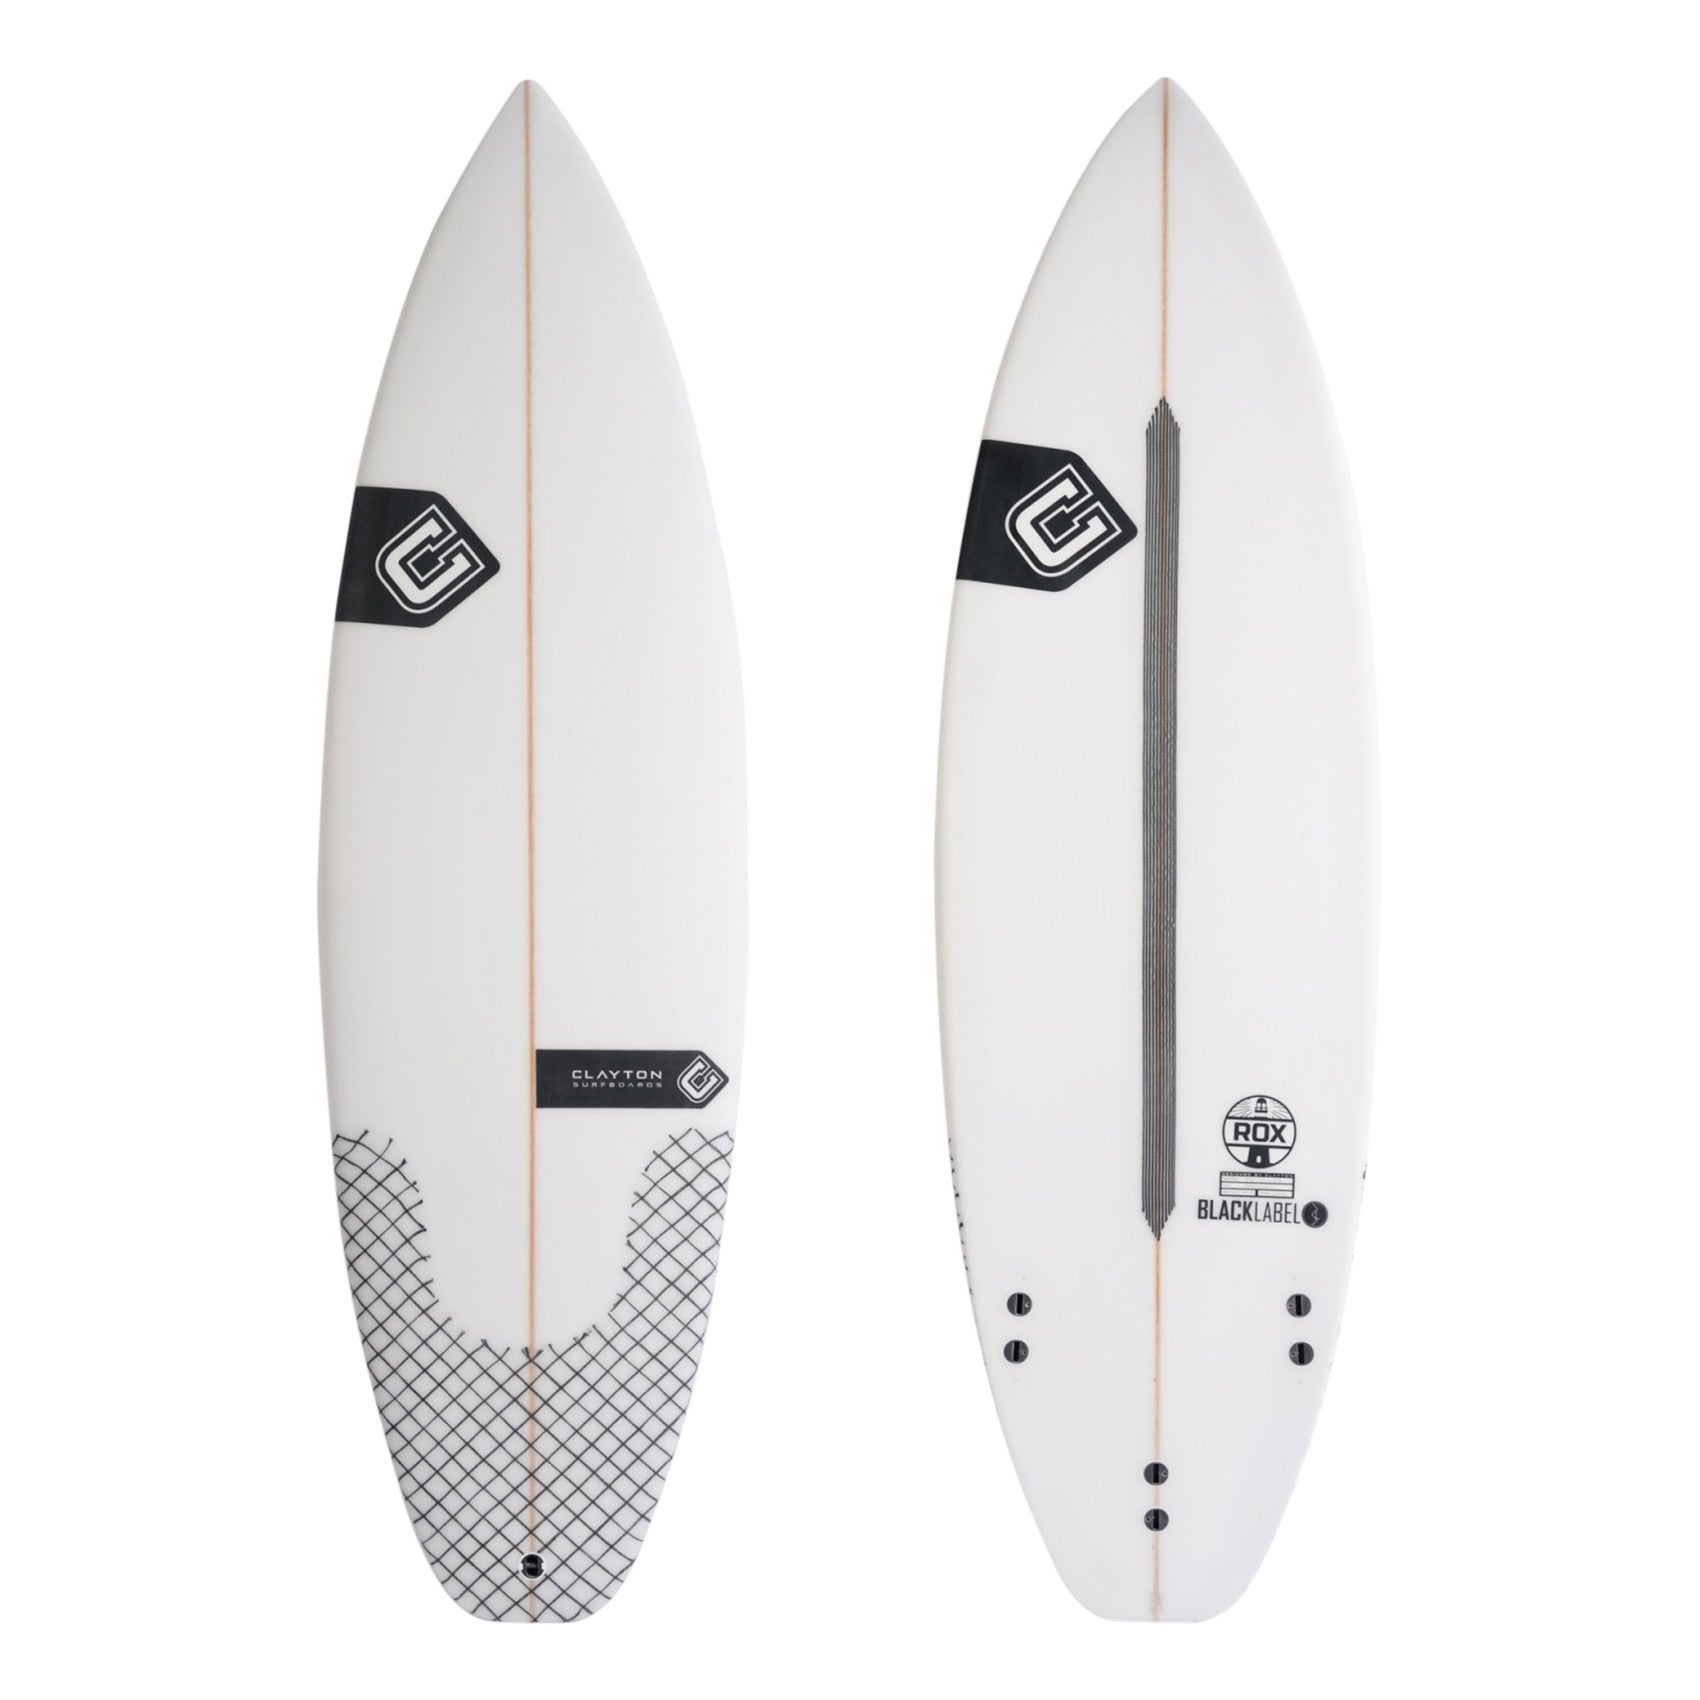 CLAYTON Surfboards - The Rox Black Label Edition (PU)